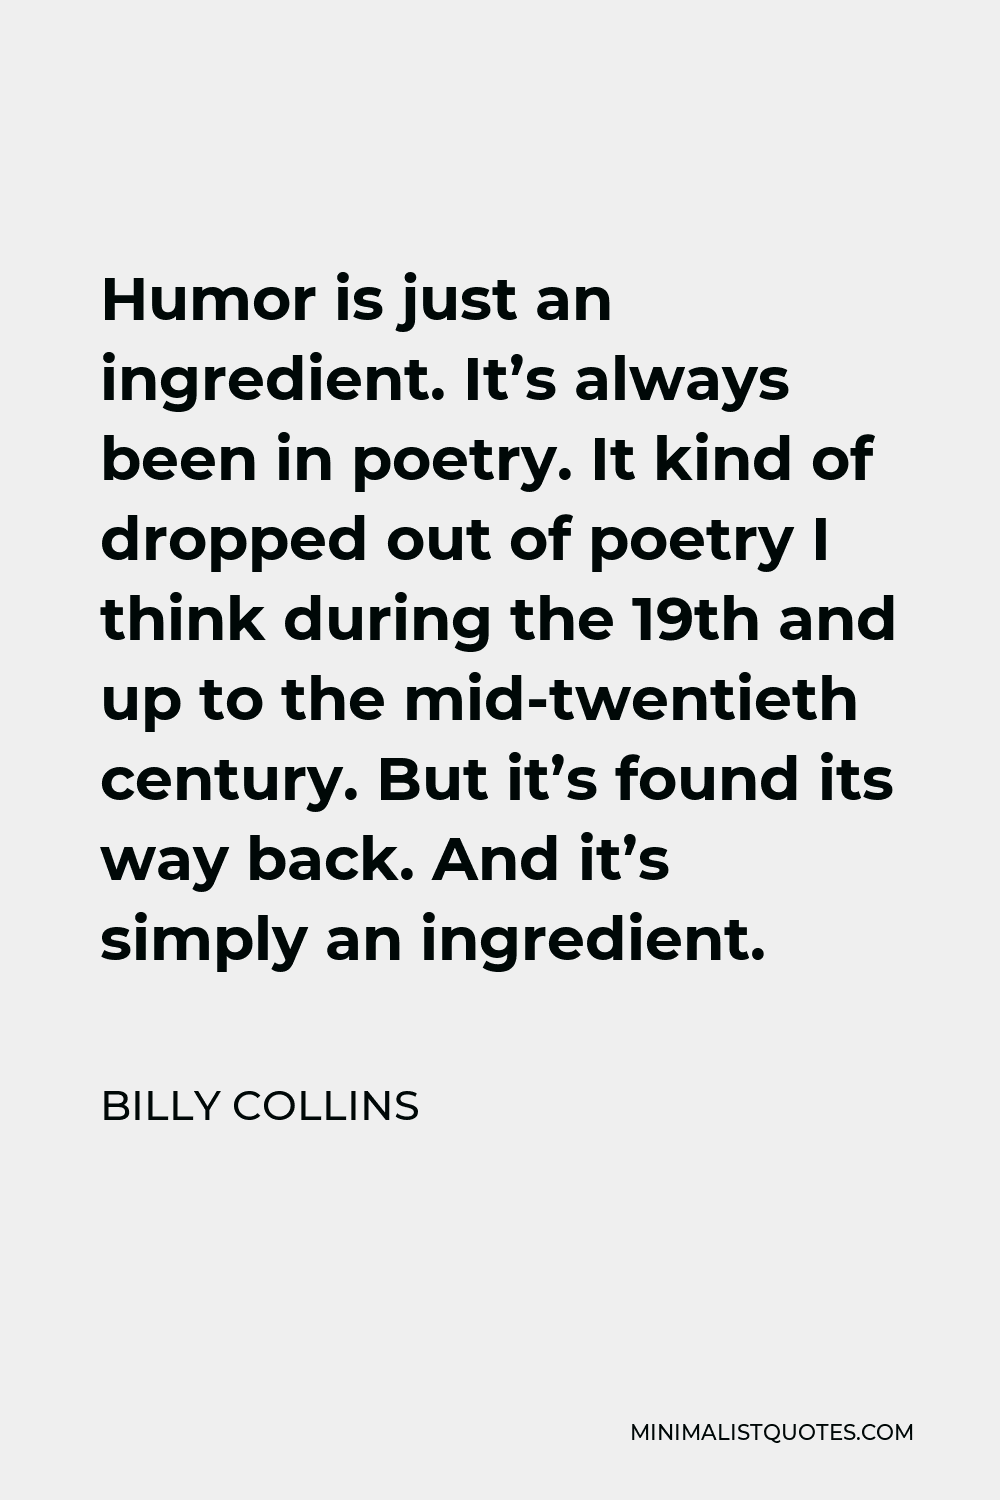 Billy Collins Quote - Humor is just an ingredient. It’s always been in poetry. It kind of dropped out of poetry I think during the 19th and up to the mid-twentieth century. But it’s found its way back. And it’s simply an ingredient.